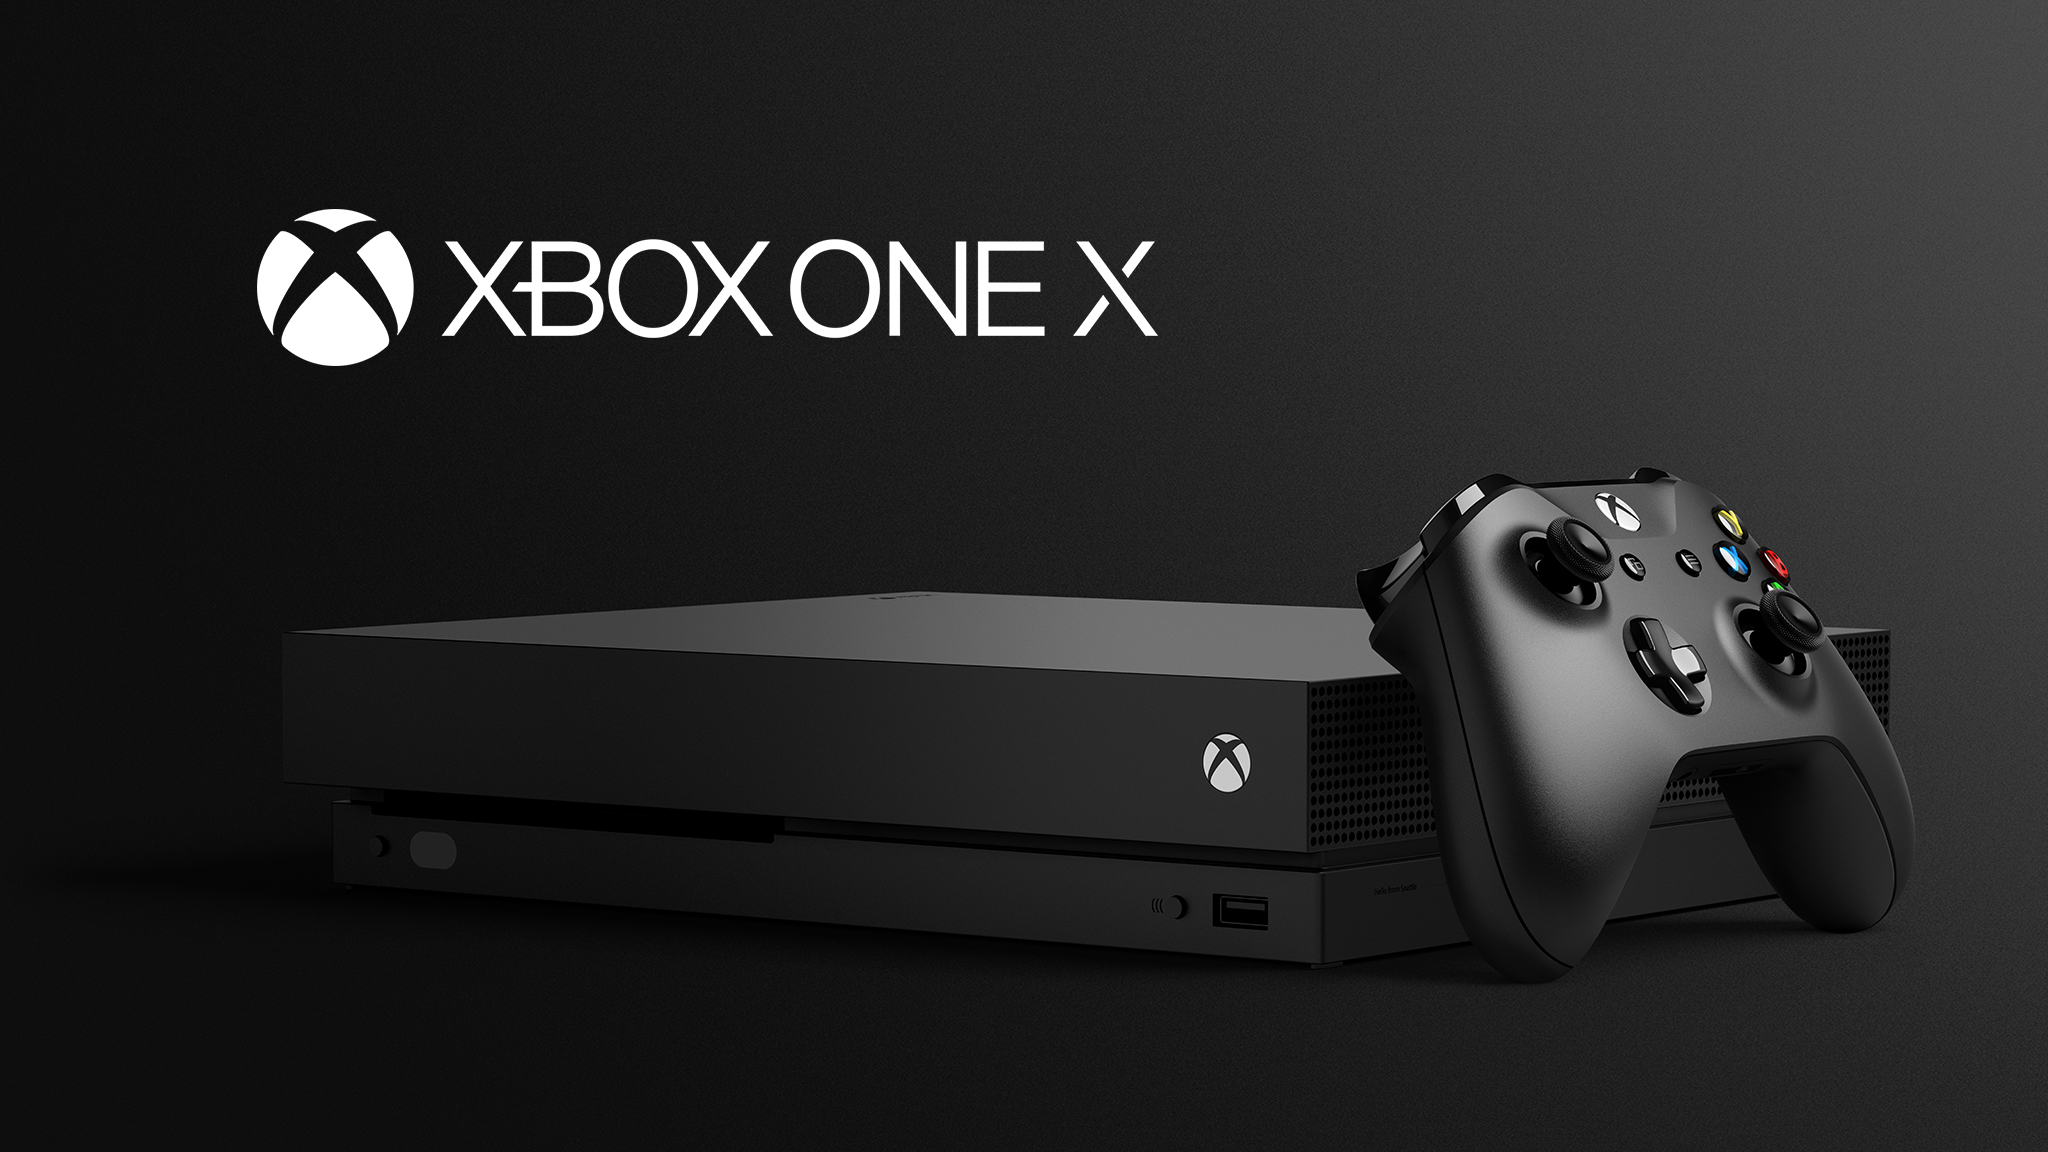 The Xbox One X is Microsoft's powerful new 4K console